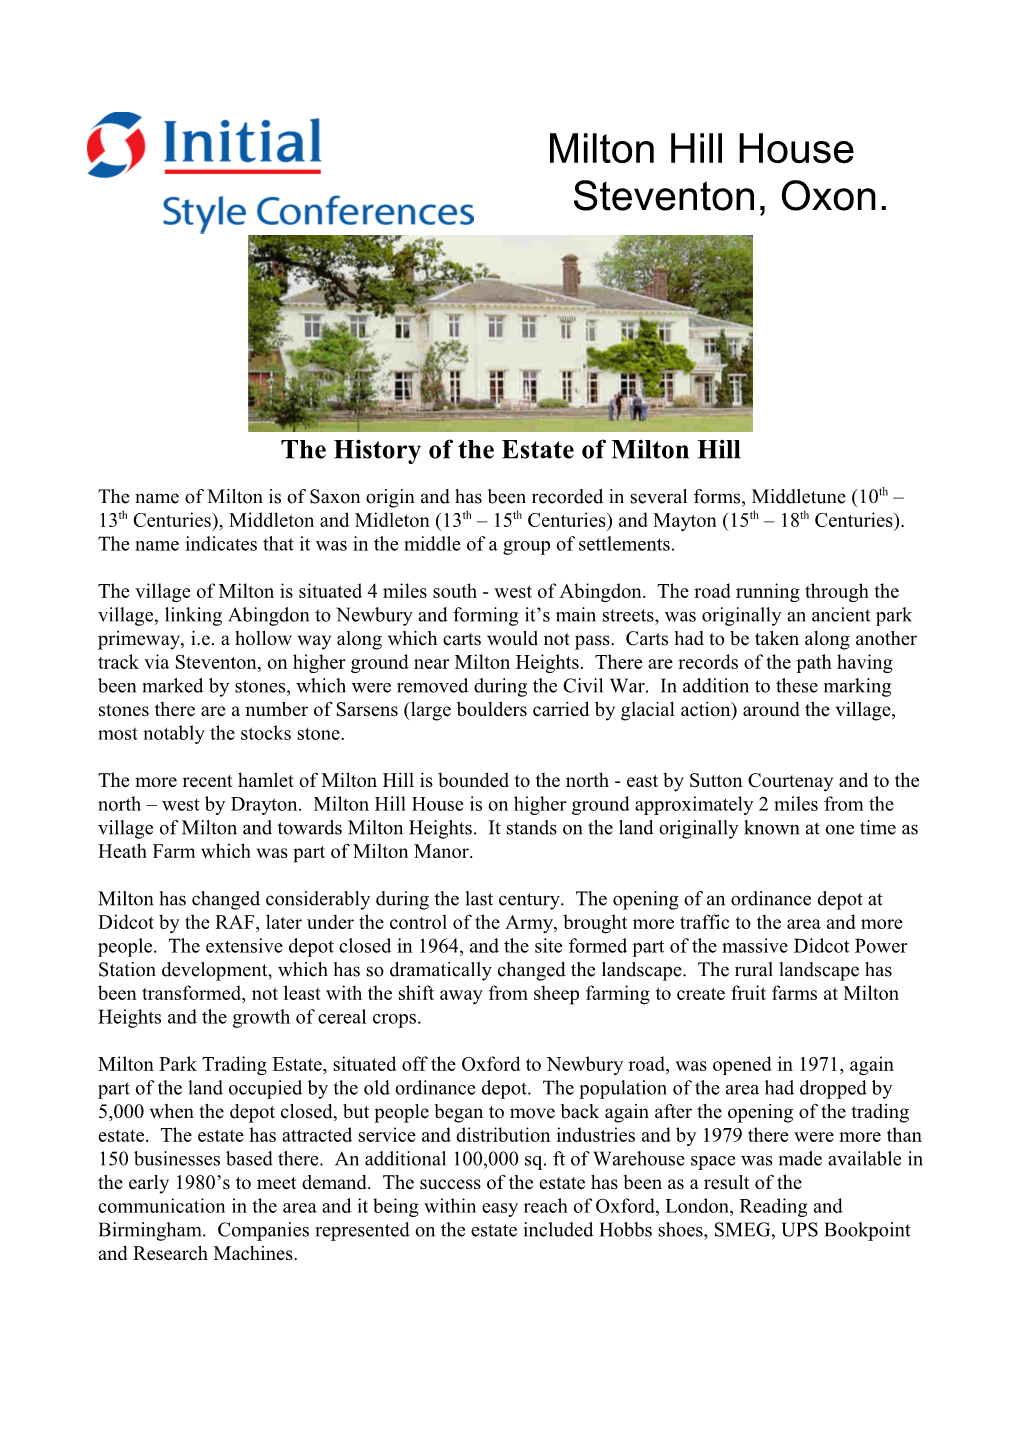 The History of the Estate of Milton Hill